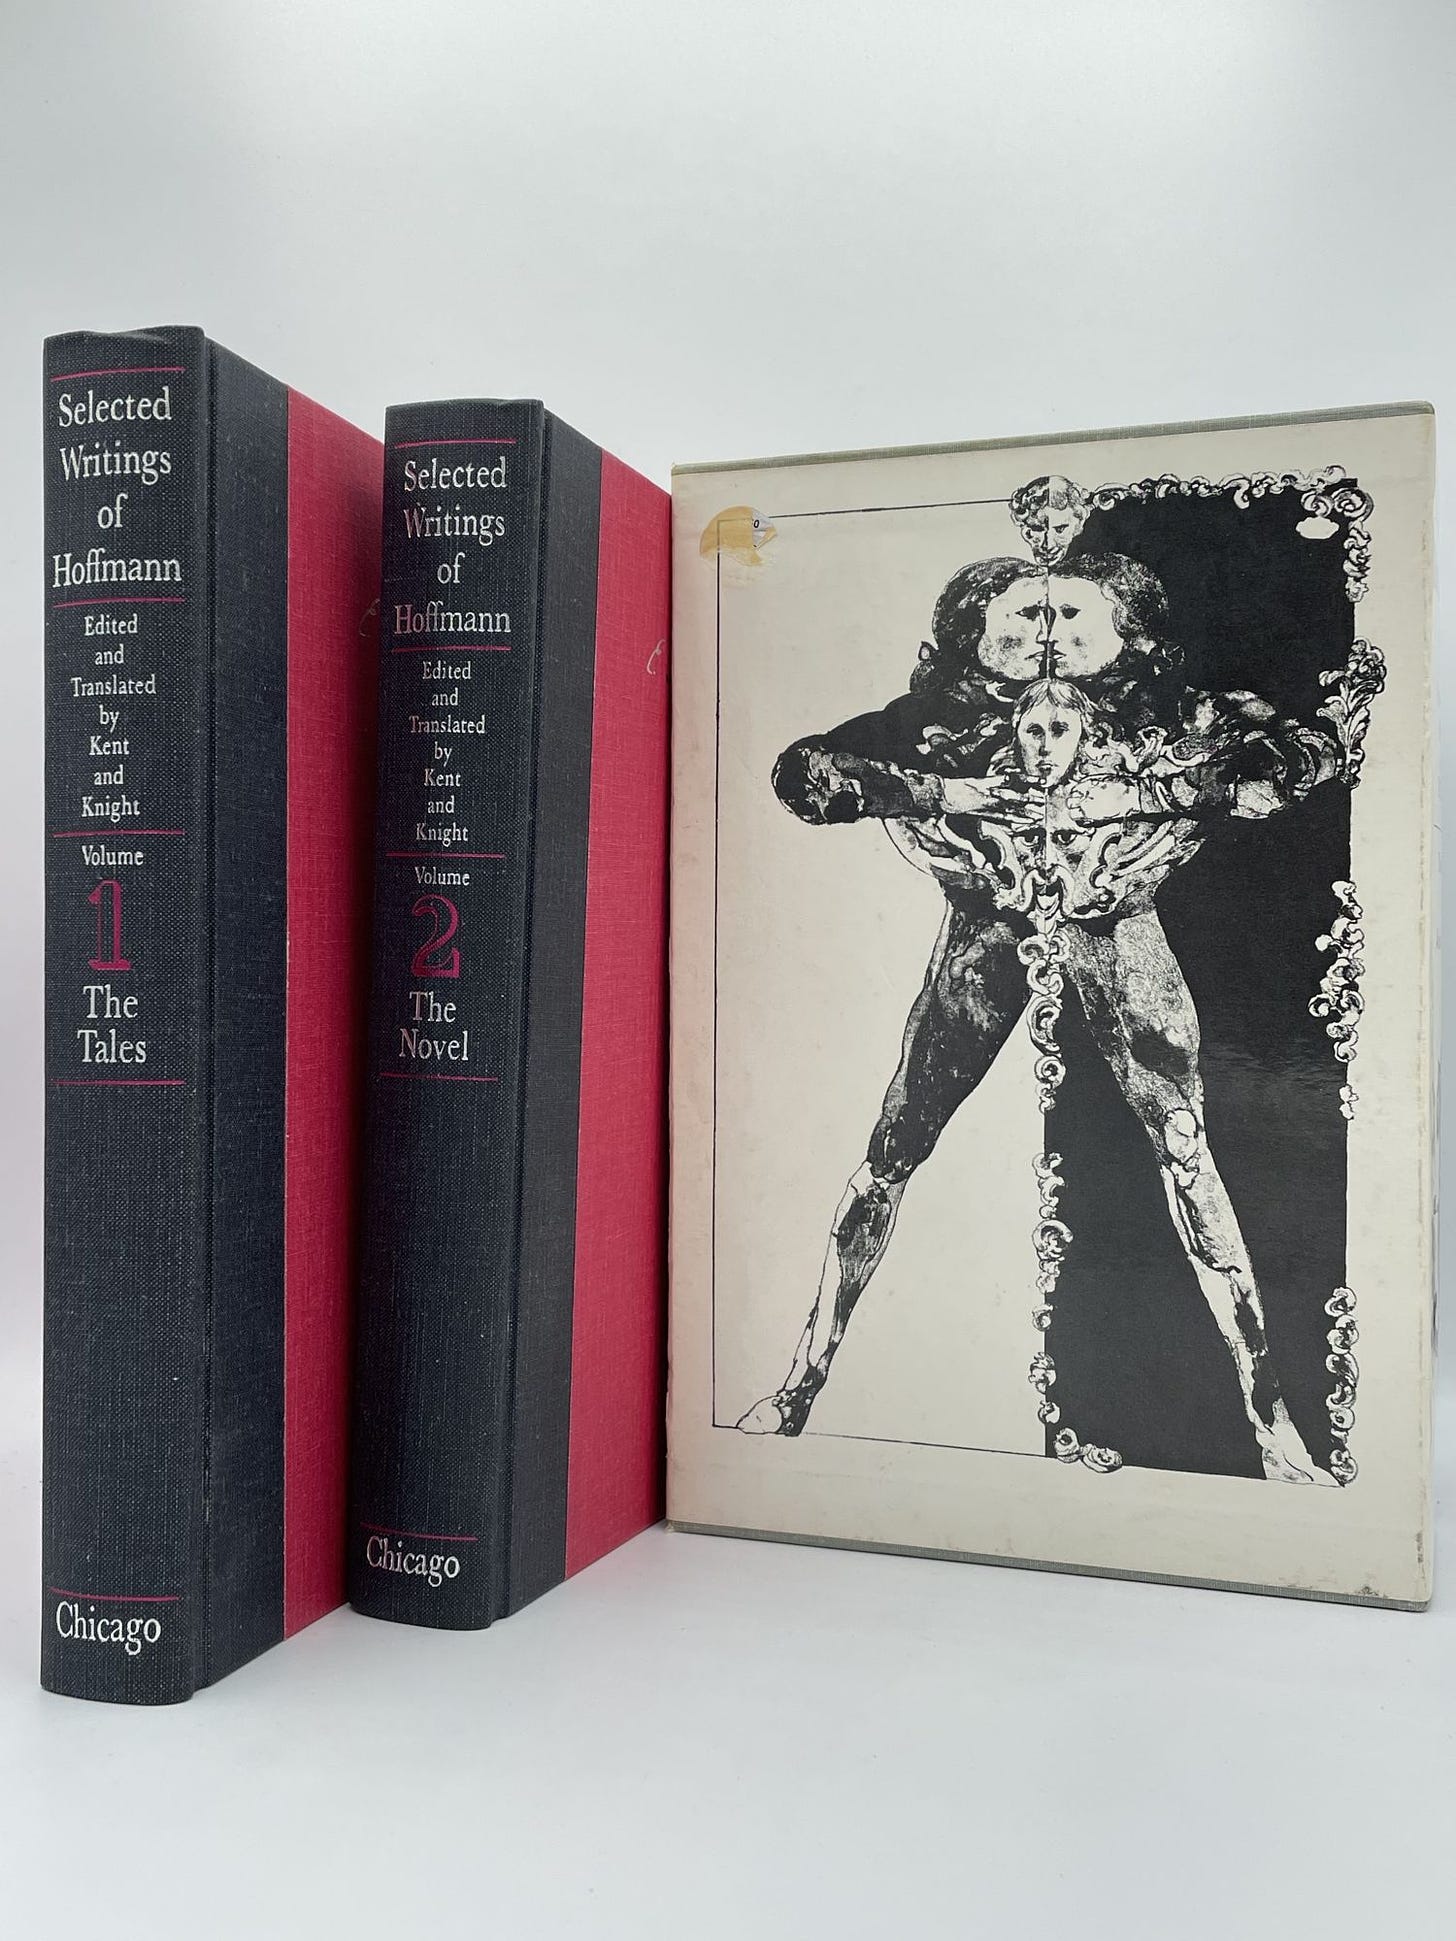 Spines and slipcase of Selected Writings of Hoffmann